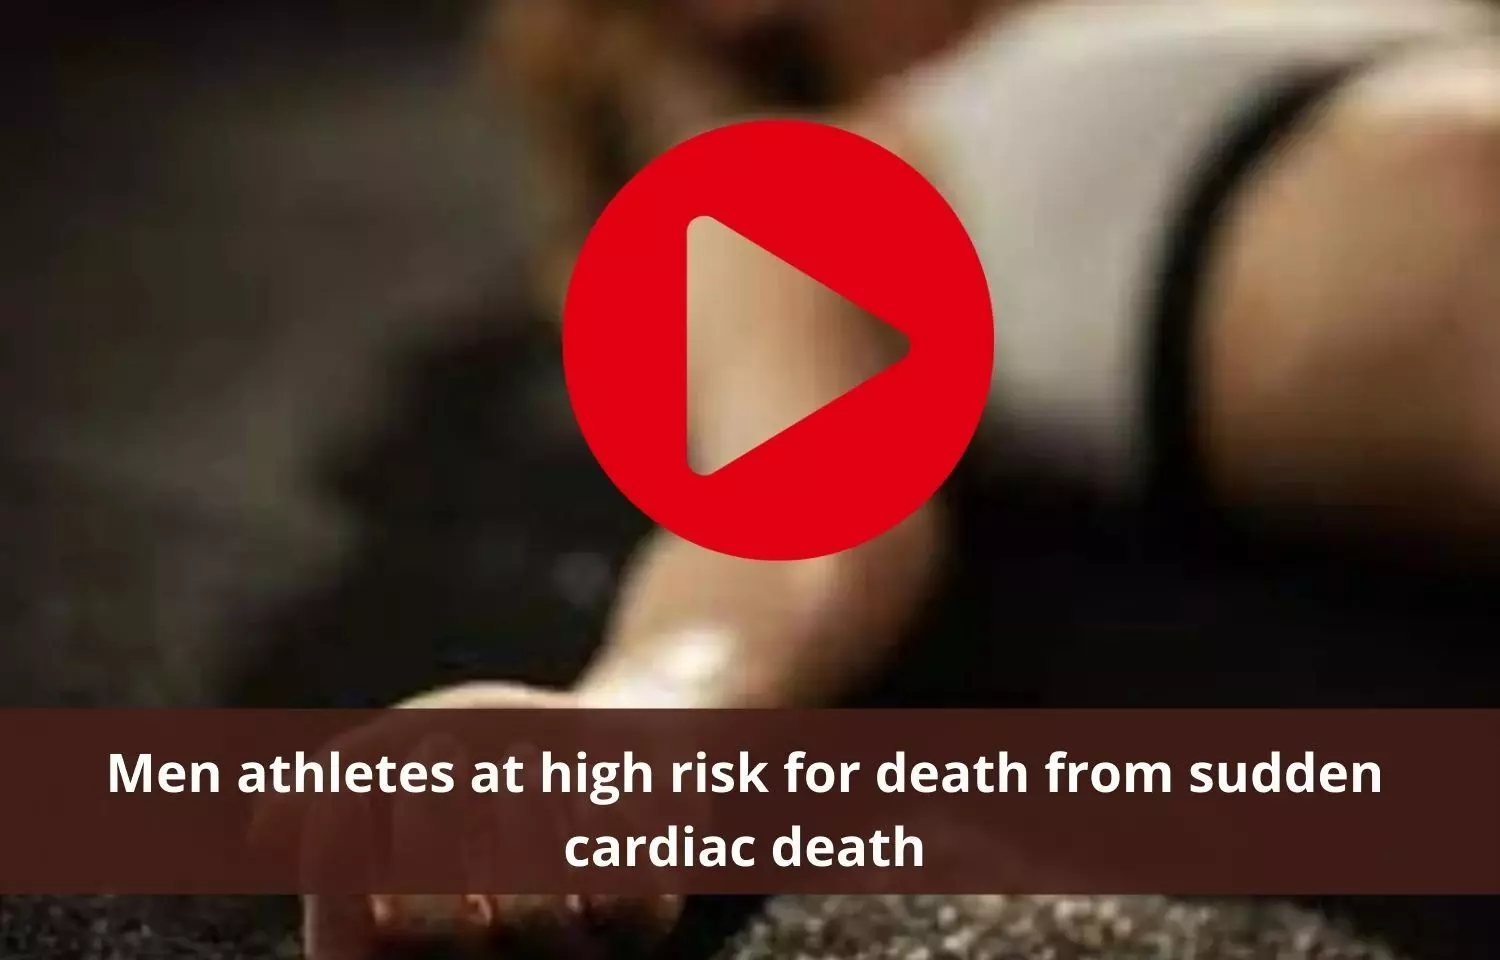 Men atheletes more prone to have sudden cardiac death than women